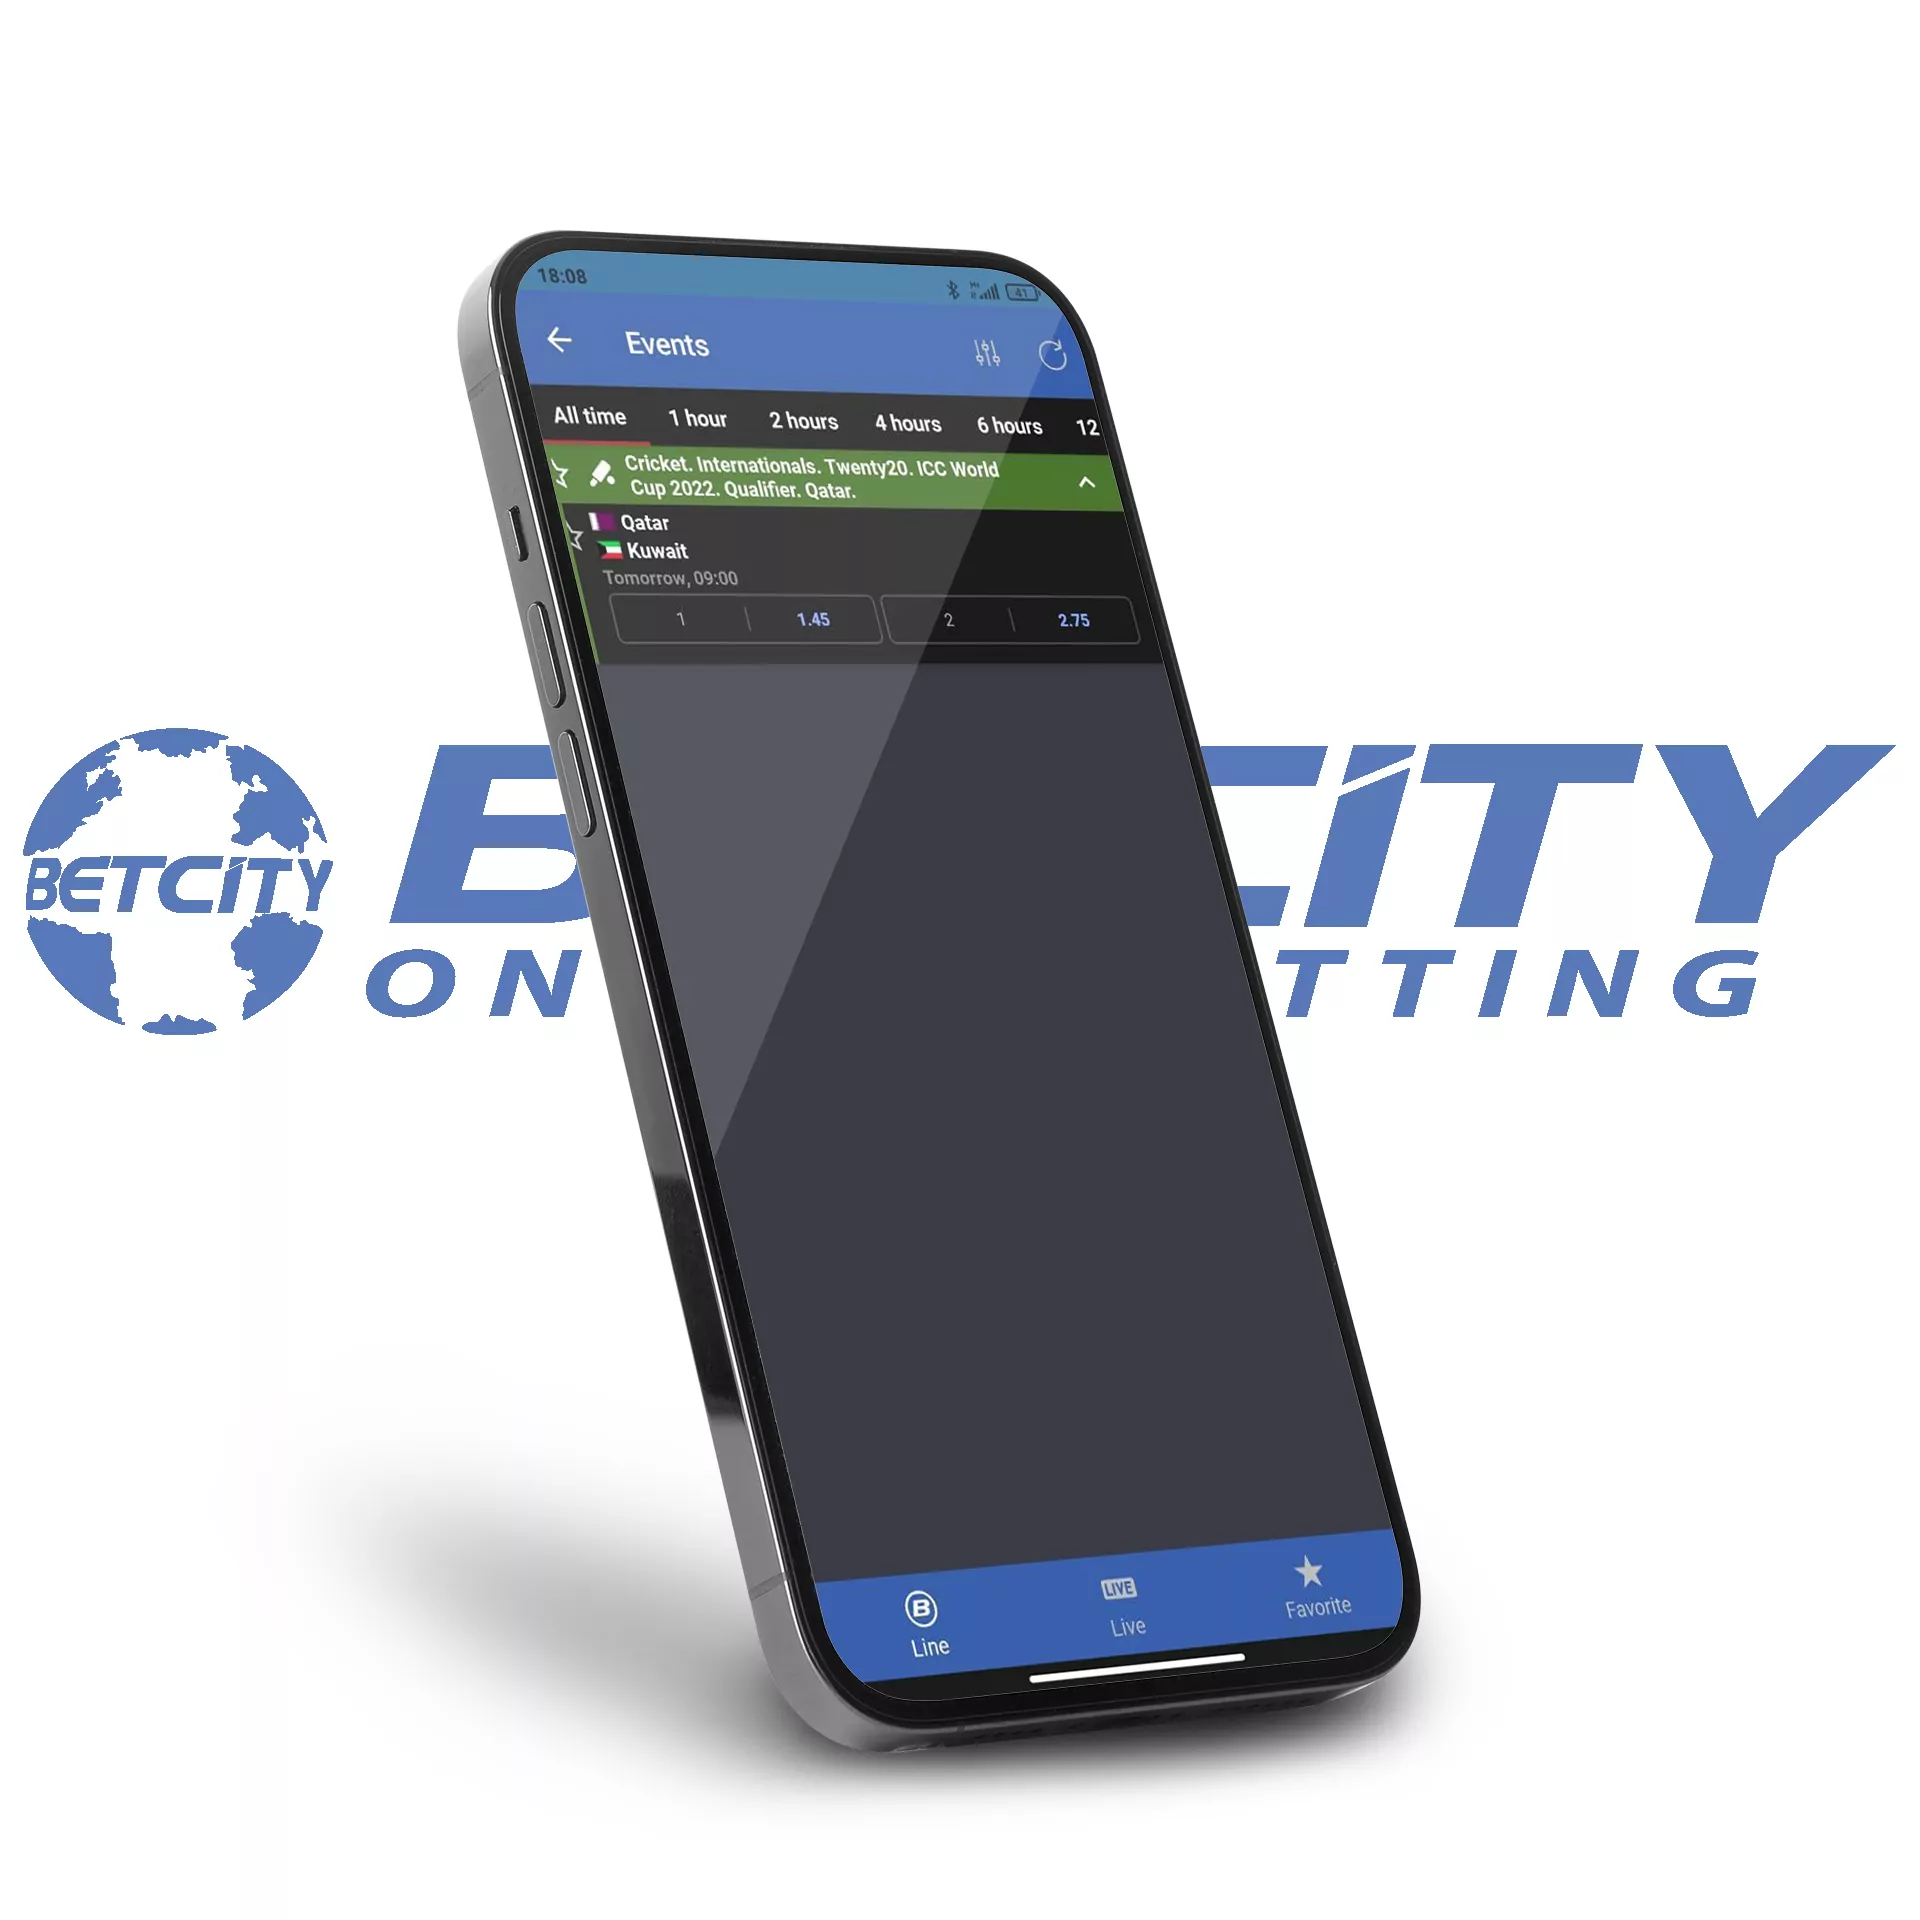 Betting via the Betcity app is easier and much more convenient.